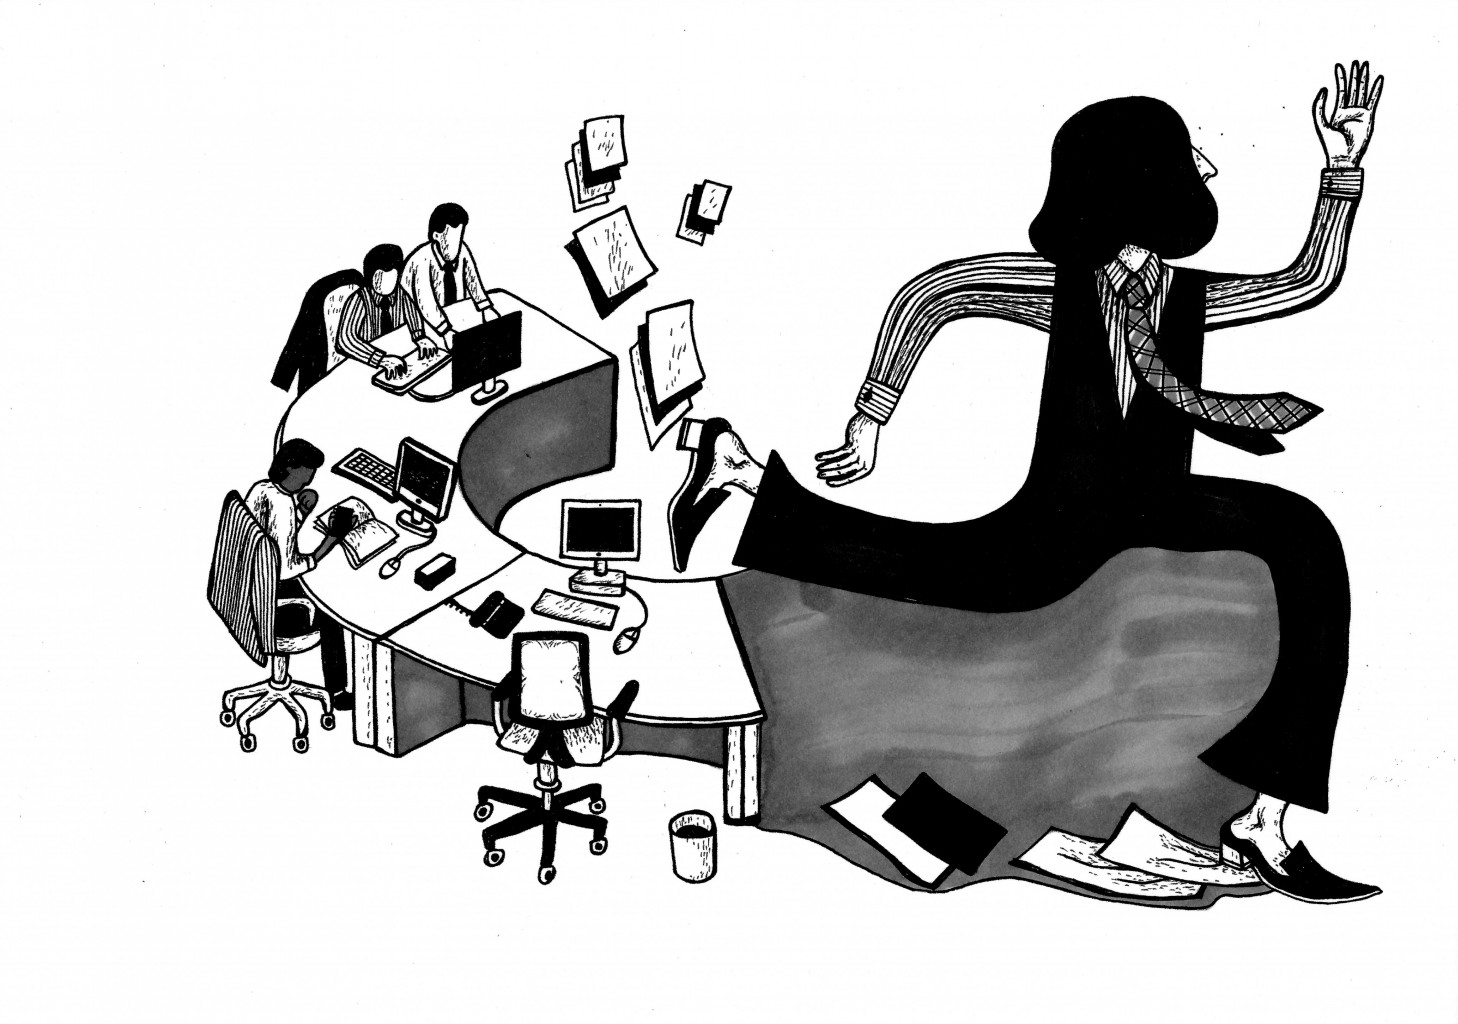 In a newsroom, desks are set in a circular fashion with employees working on computers. A larger illustration of a person shows her running with papers flying behind her.